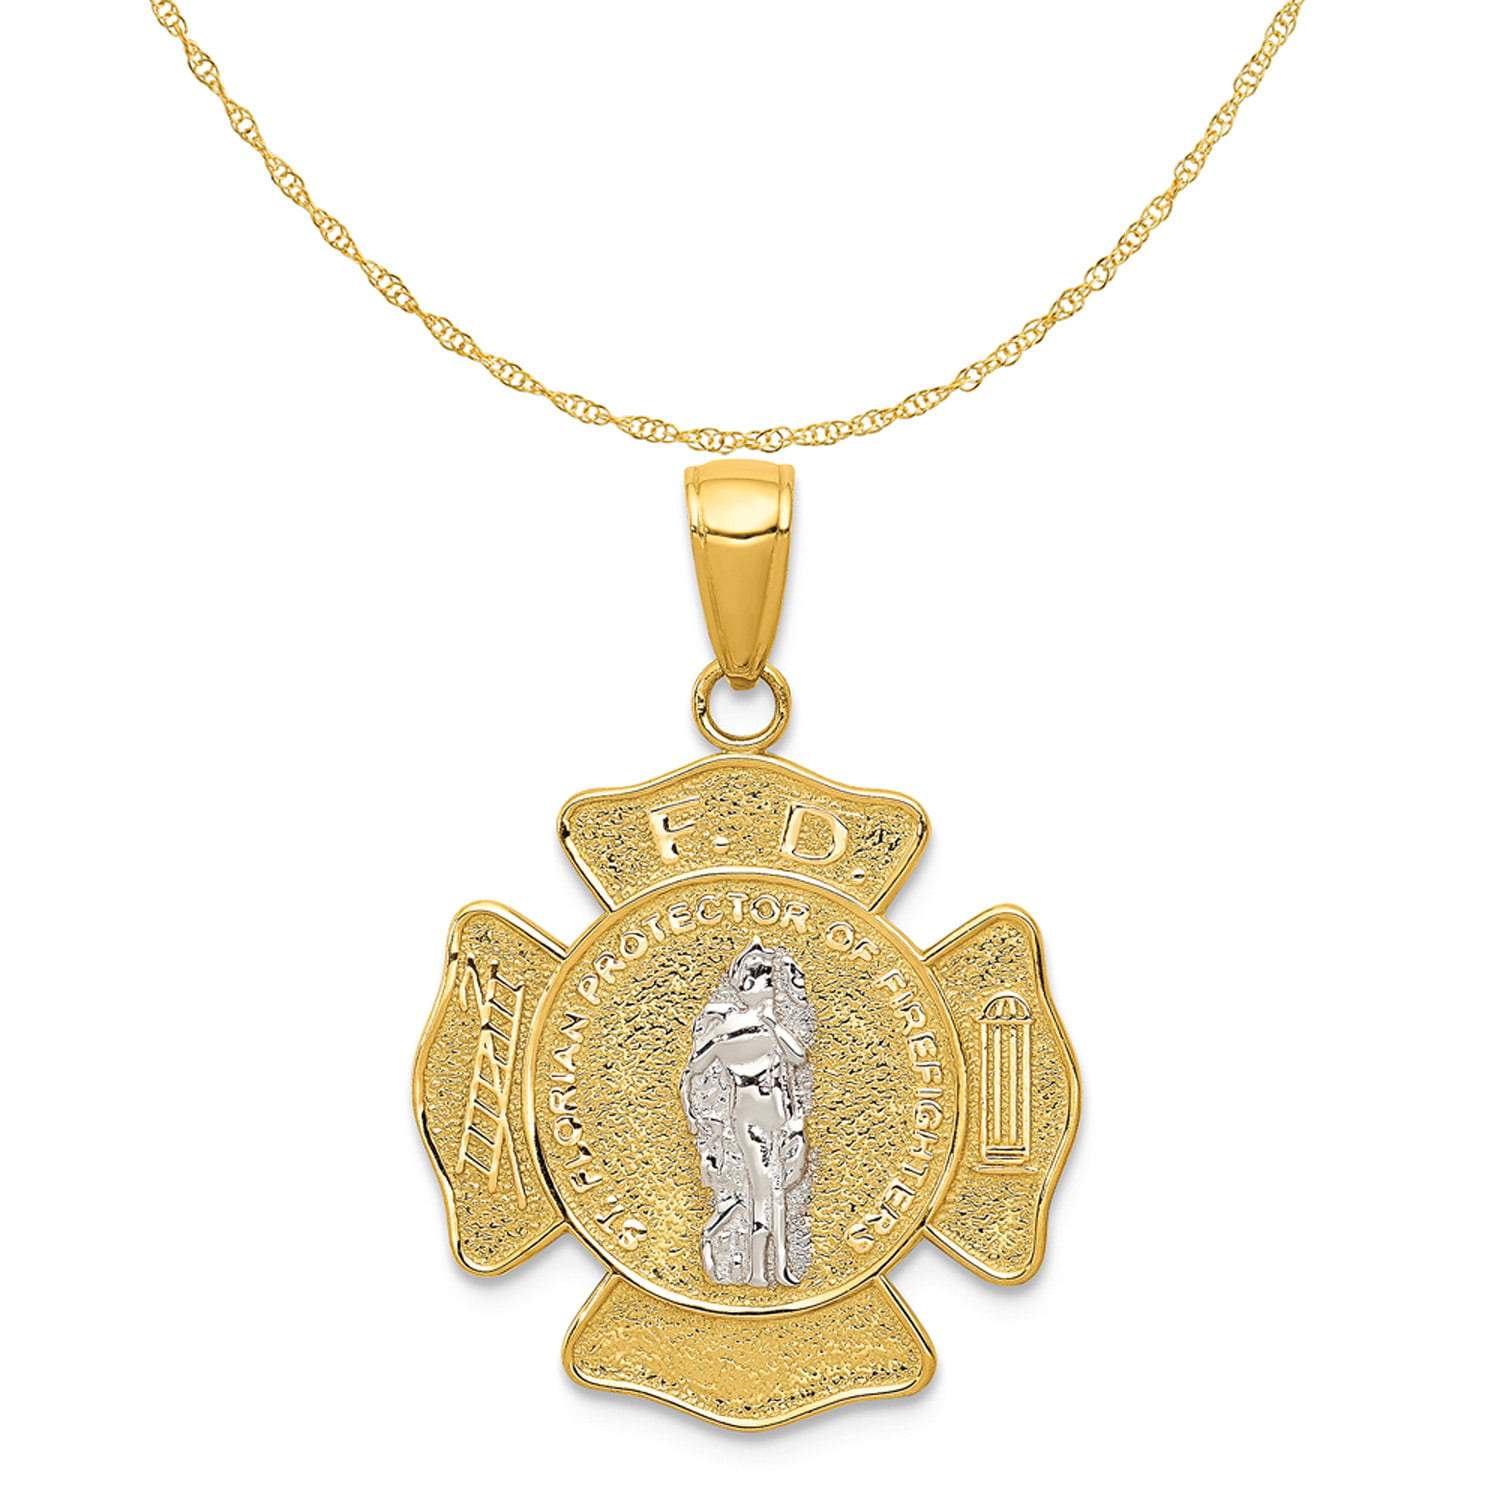 18-Inch Hamilton Gold Plated Necklace with 6mm Jet Birthstone Beads and Gold Filled Saint Christopher/Volleyball Charm.